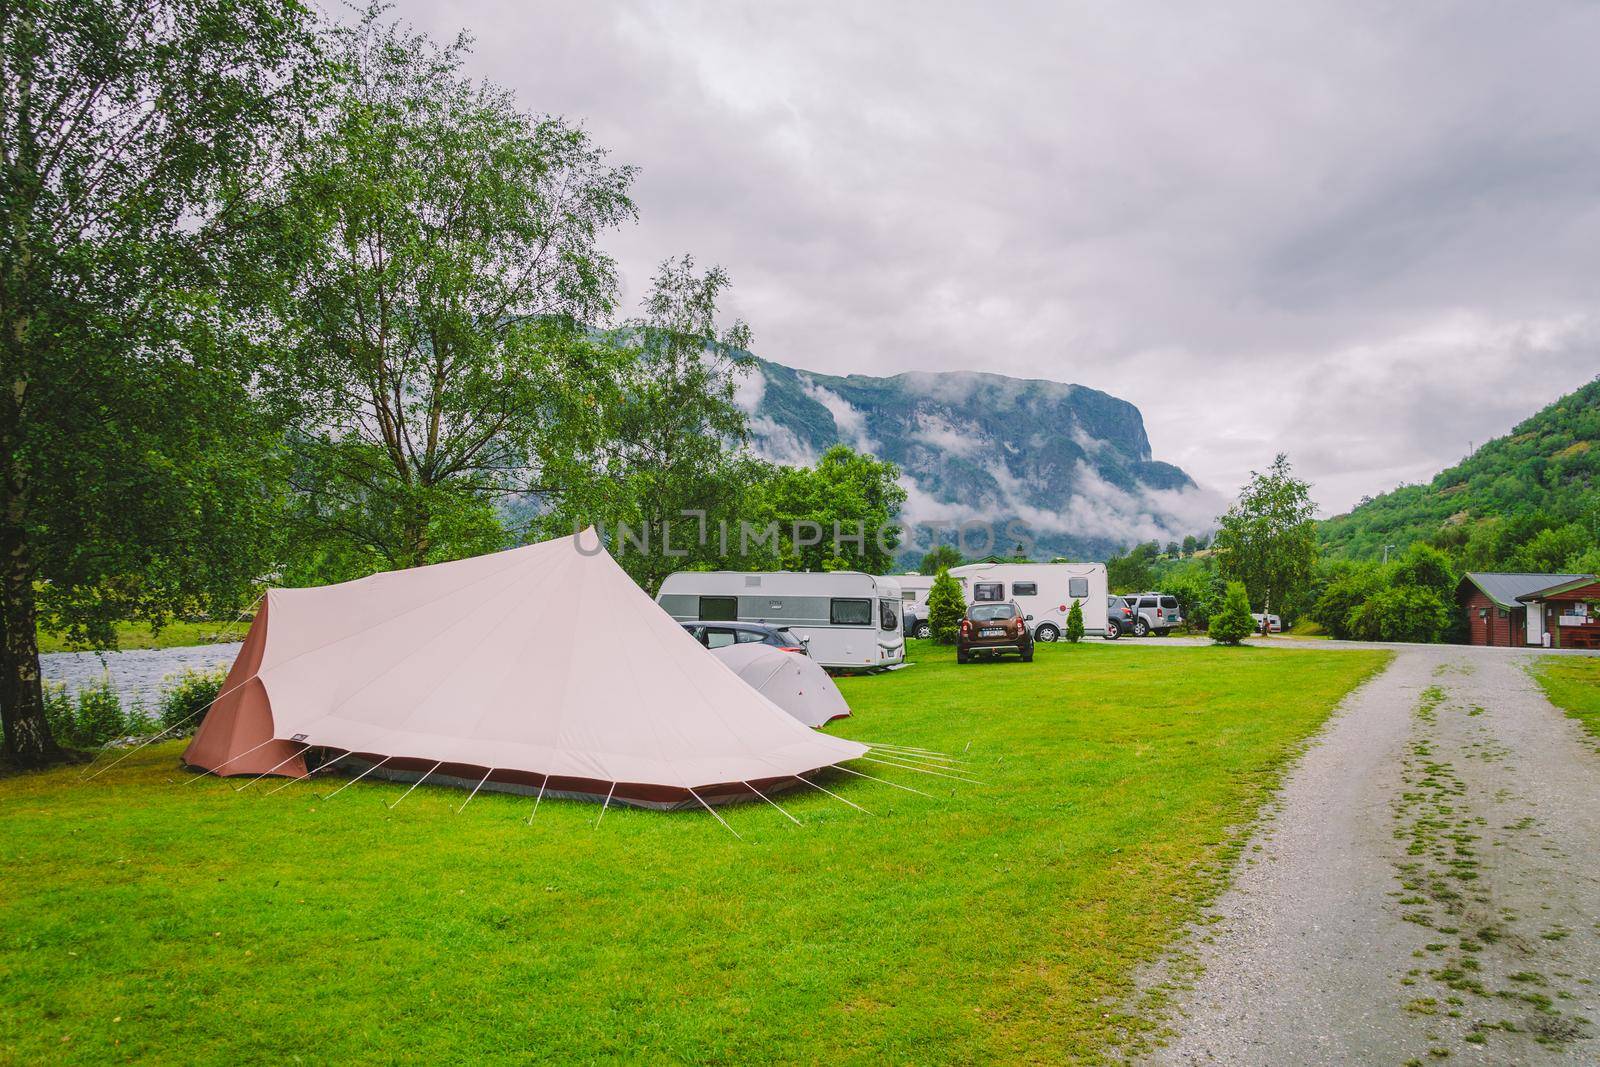 Traditional red camping houses in Lunde Camping, Norway July 21, 2019. Classical Norwegian Camping site with traditional wooden red cottages, Northern Norway. Camping cabins.